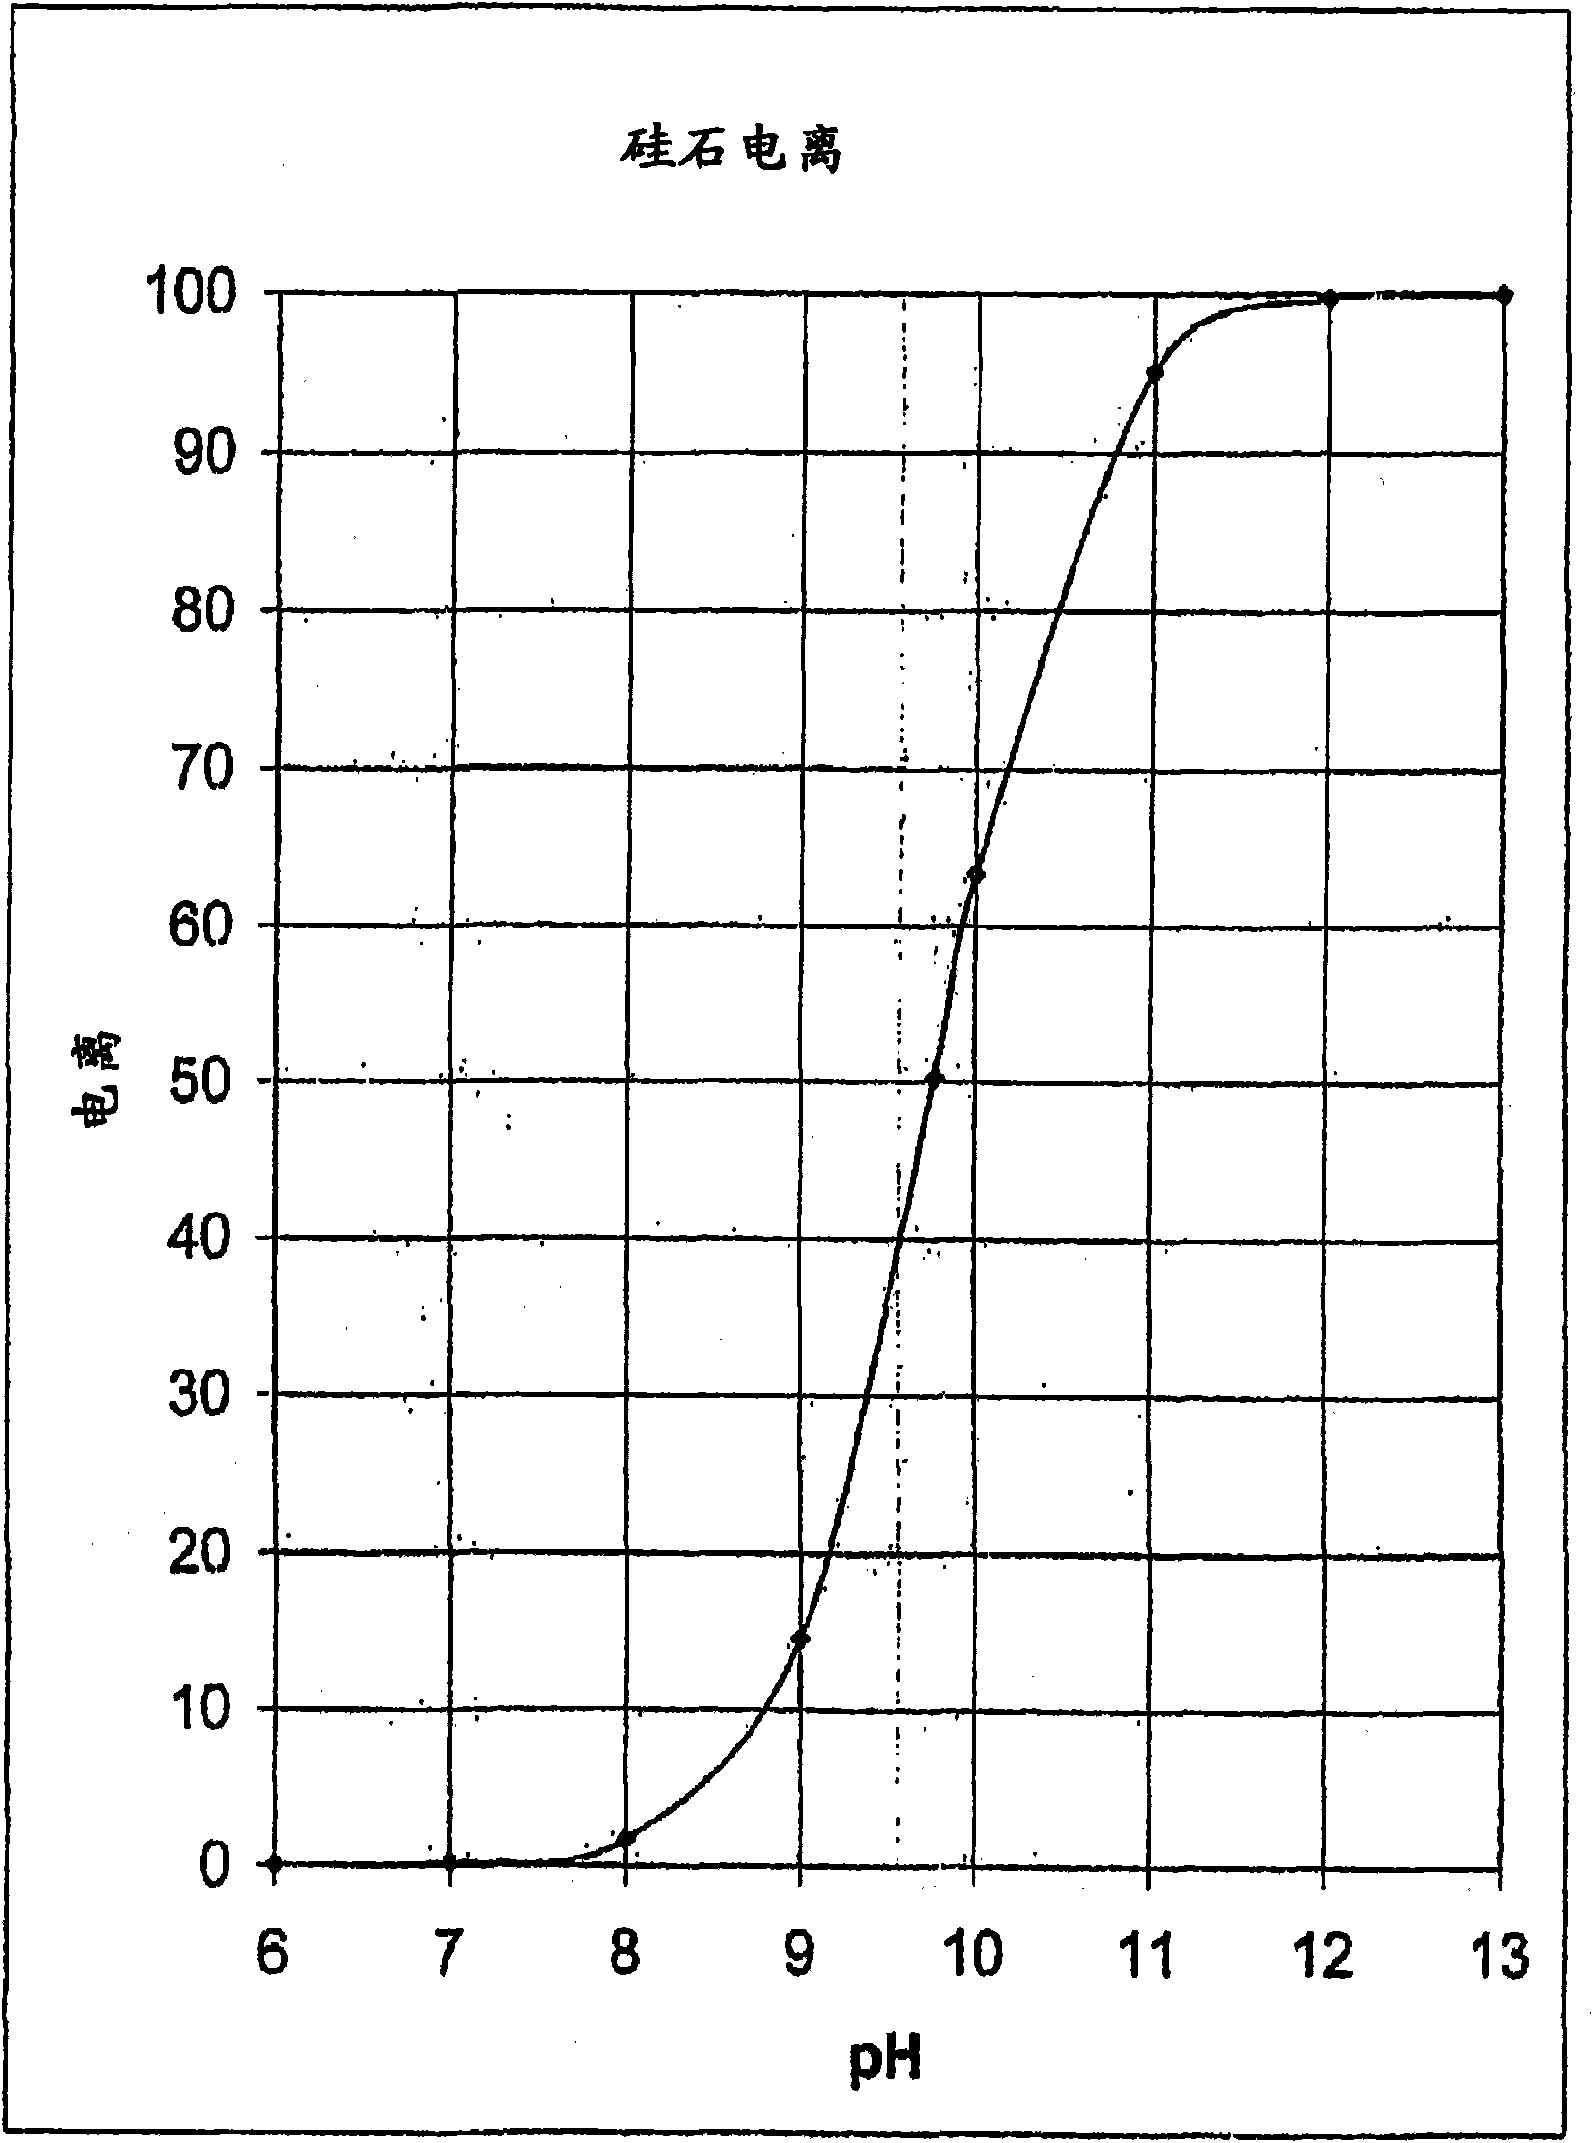 Method for treatment of high pH silica brines